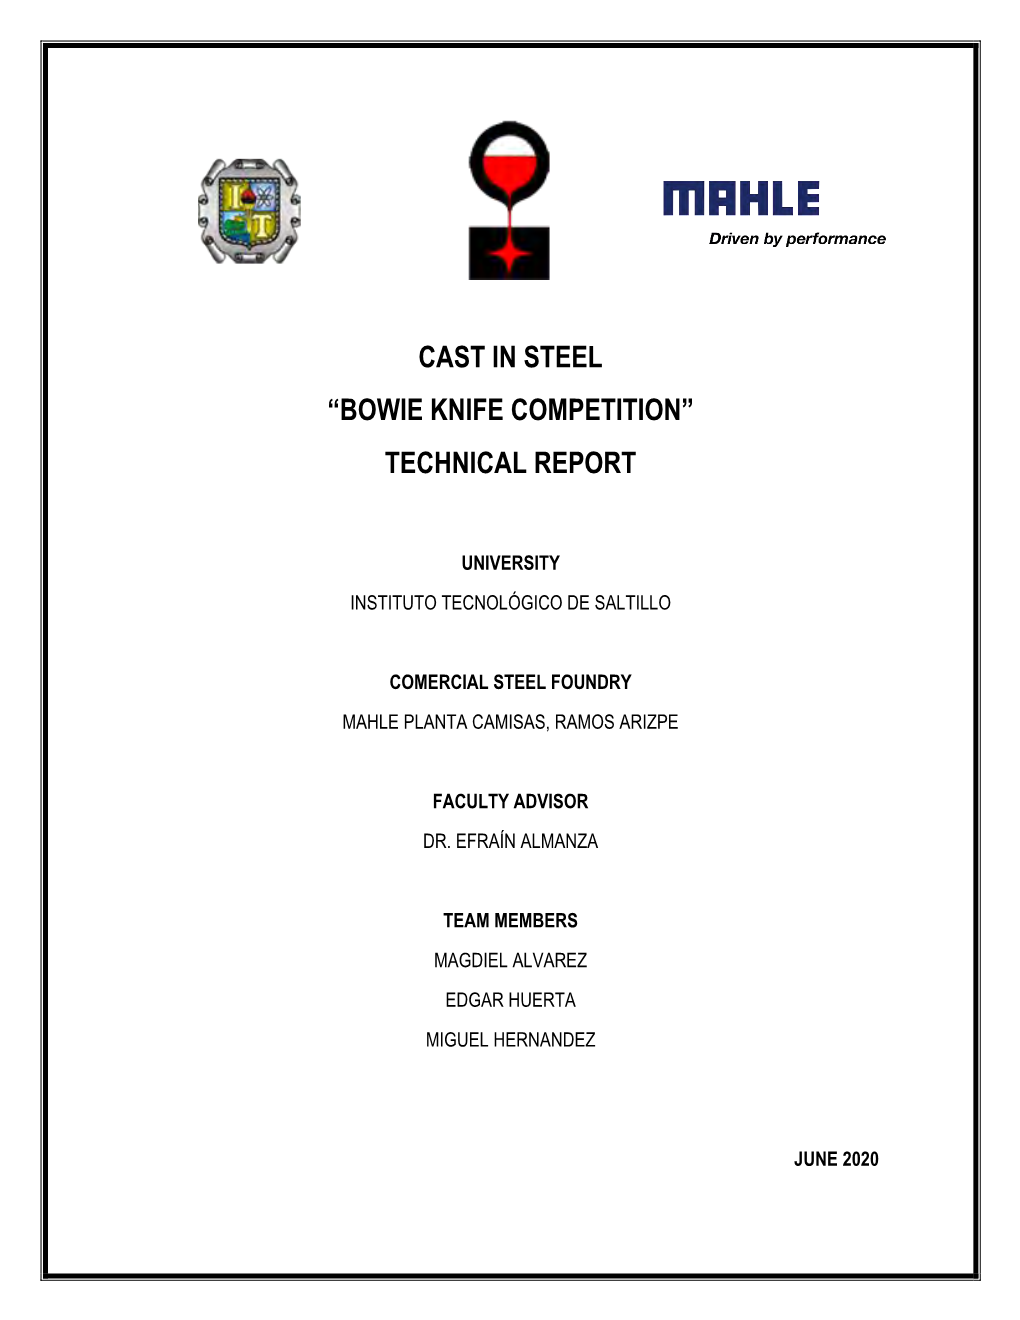 Cast in Steel “Bowie Knife Competition” Technical Report